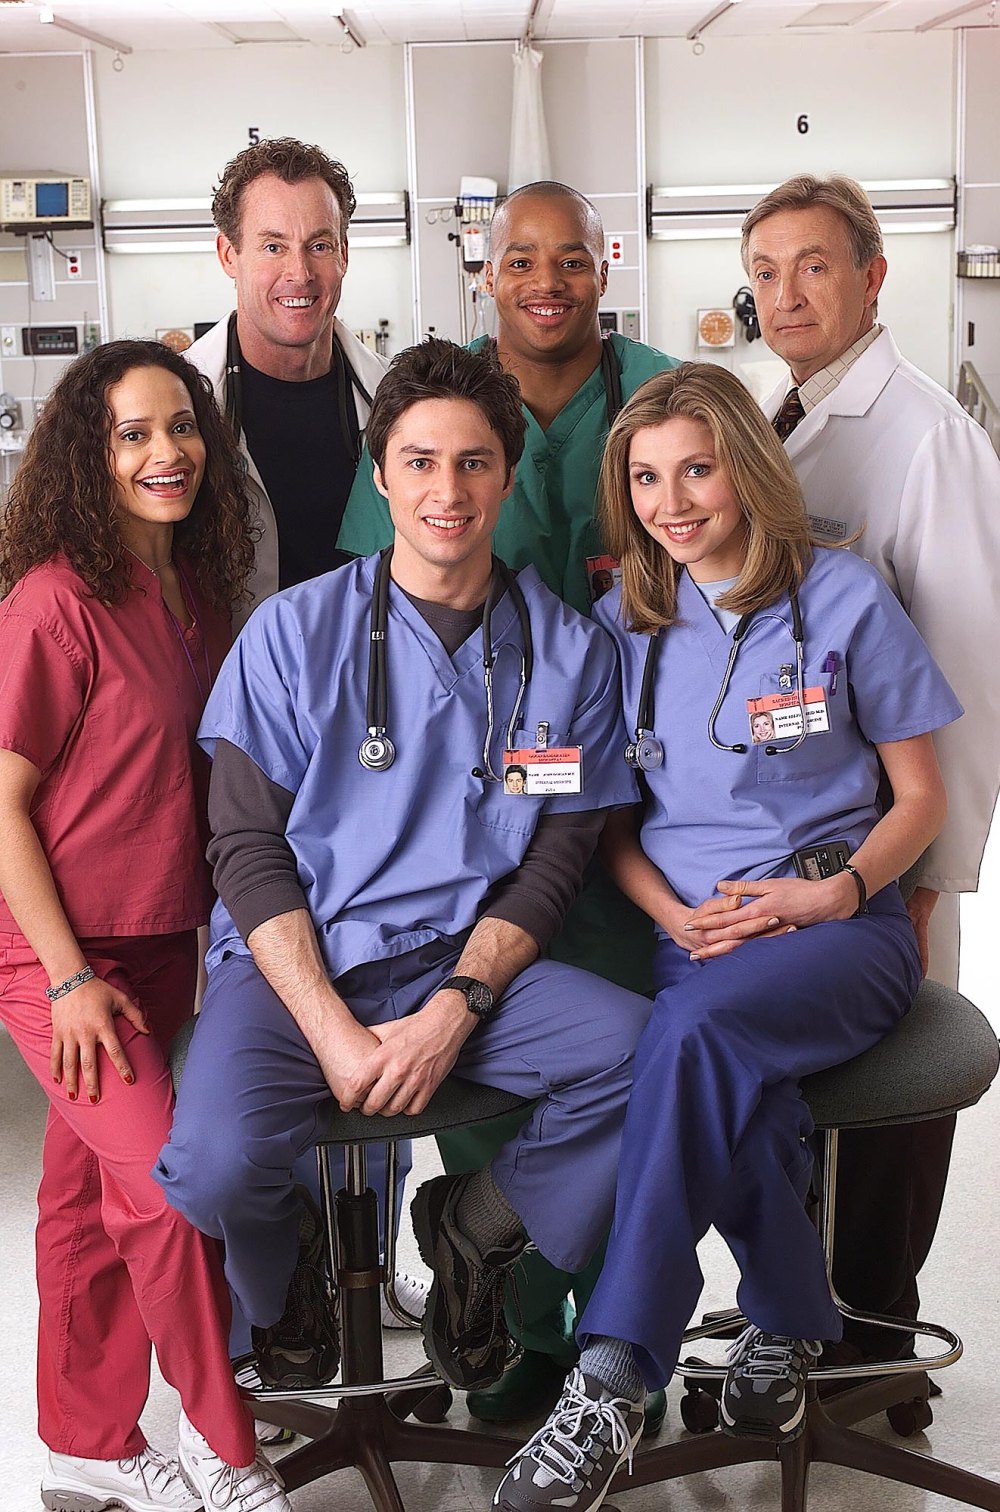 Donald Faison Teases Scrubs Fans Will be Happy in the Near Future